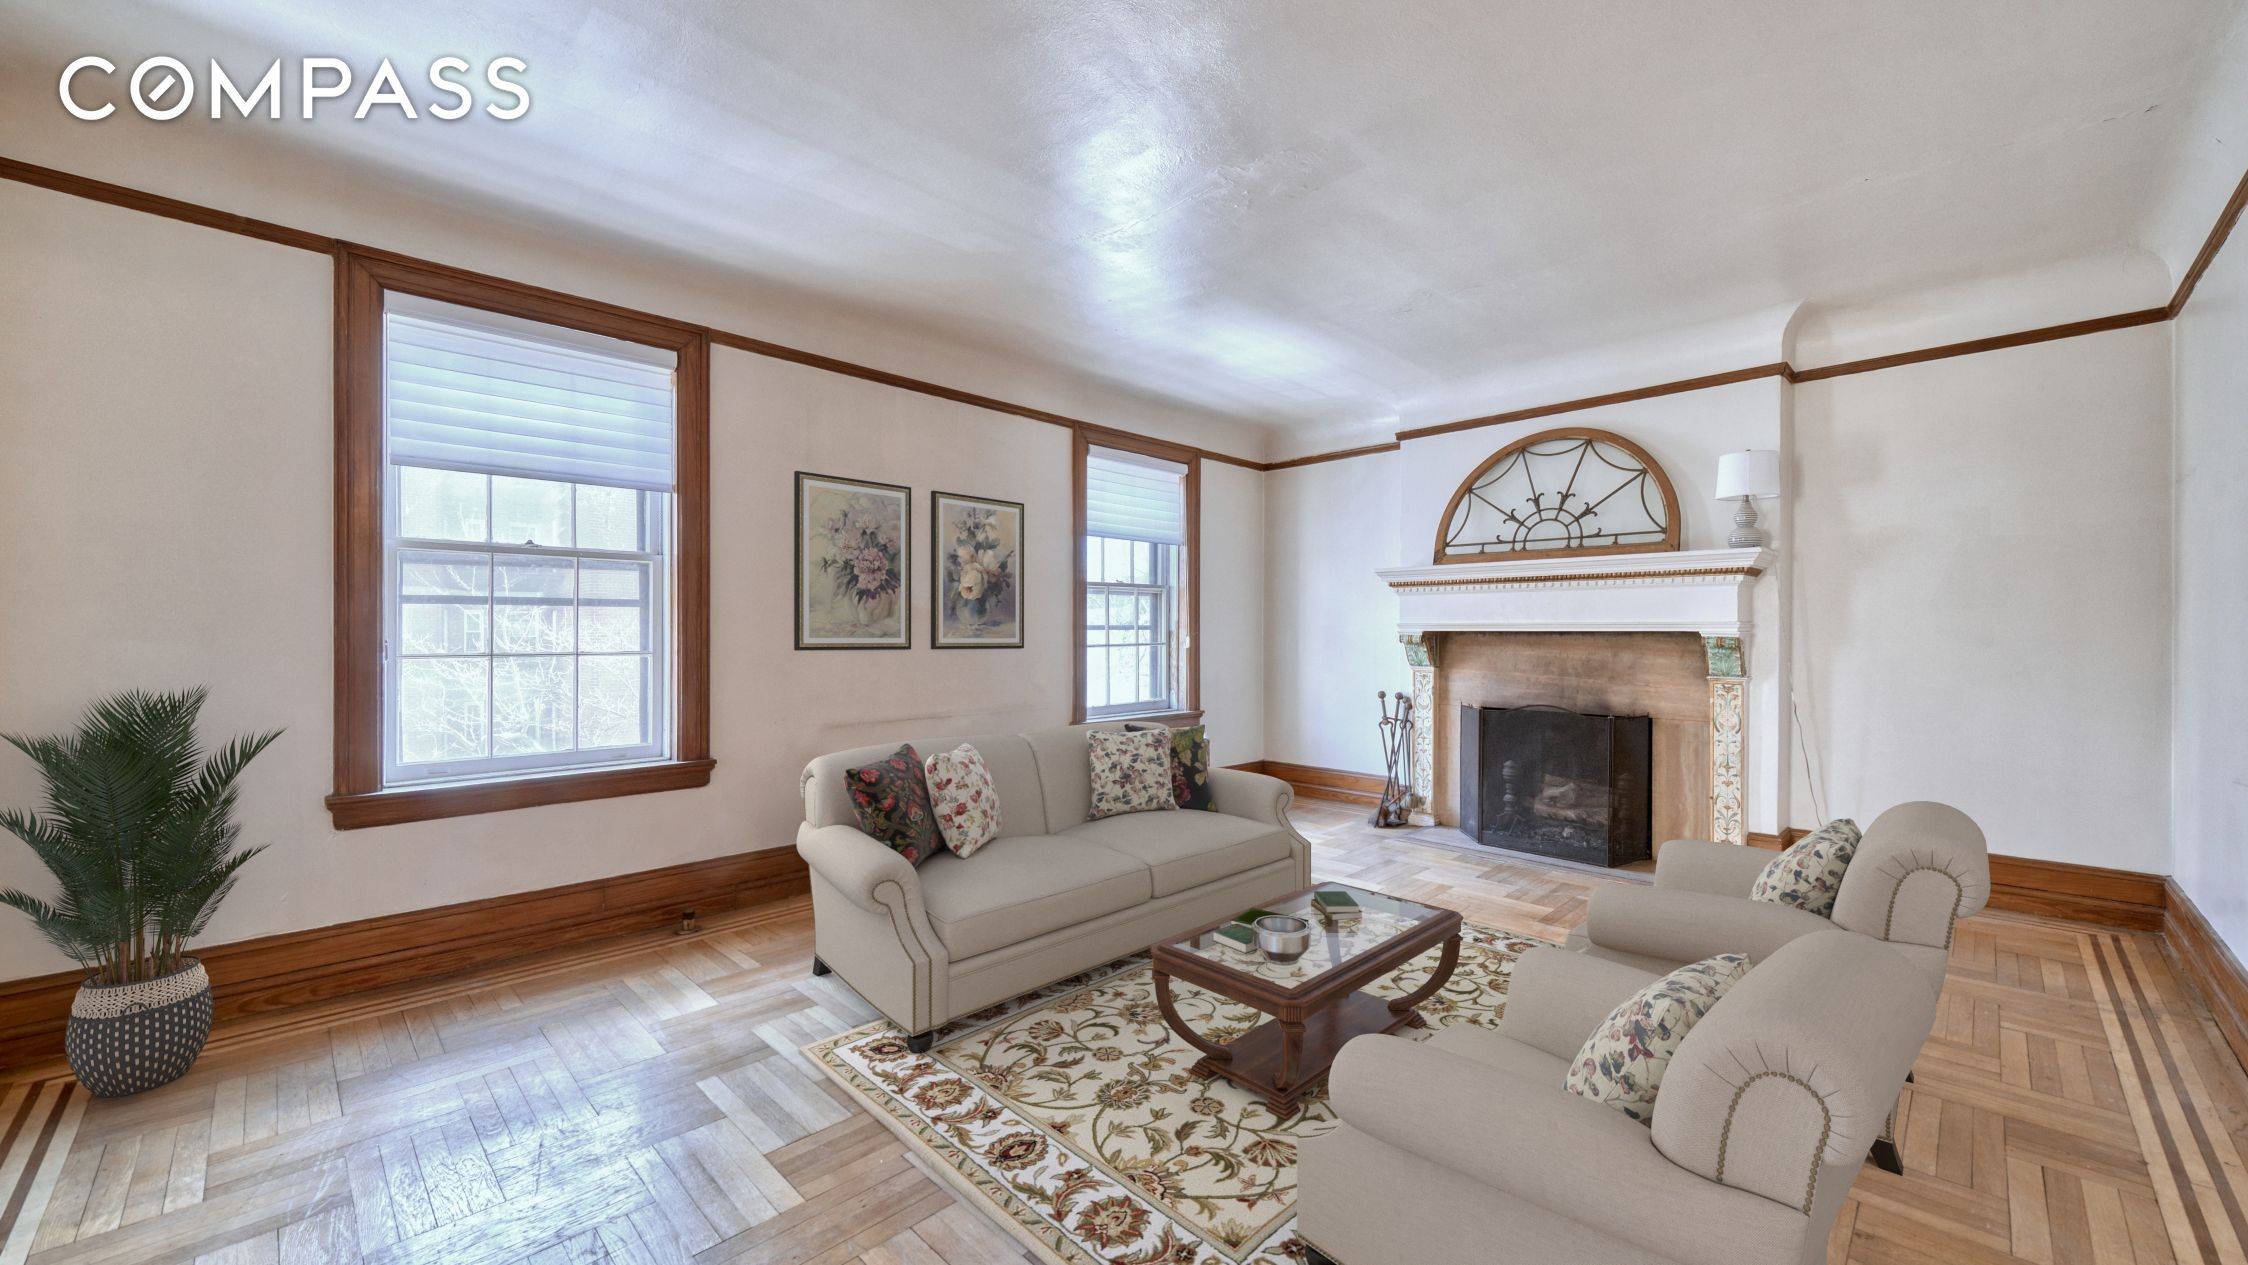 Bring your architect for this rare opportunity for a classic six apartment located in The Towers co op complex in historic Jackson Heights that still boasts some original finishes.